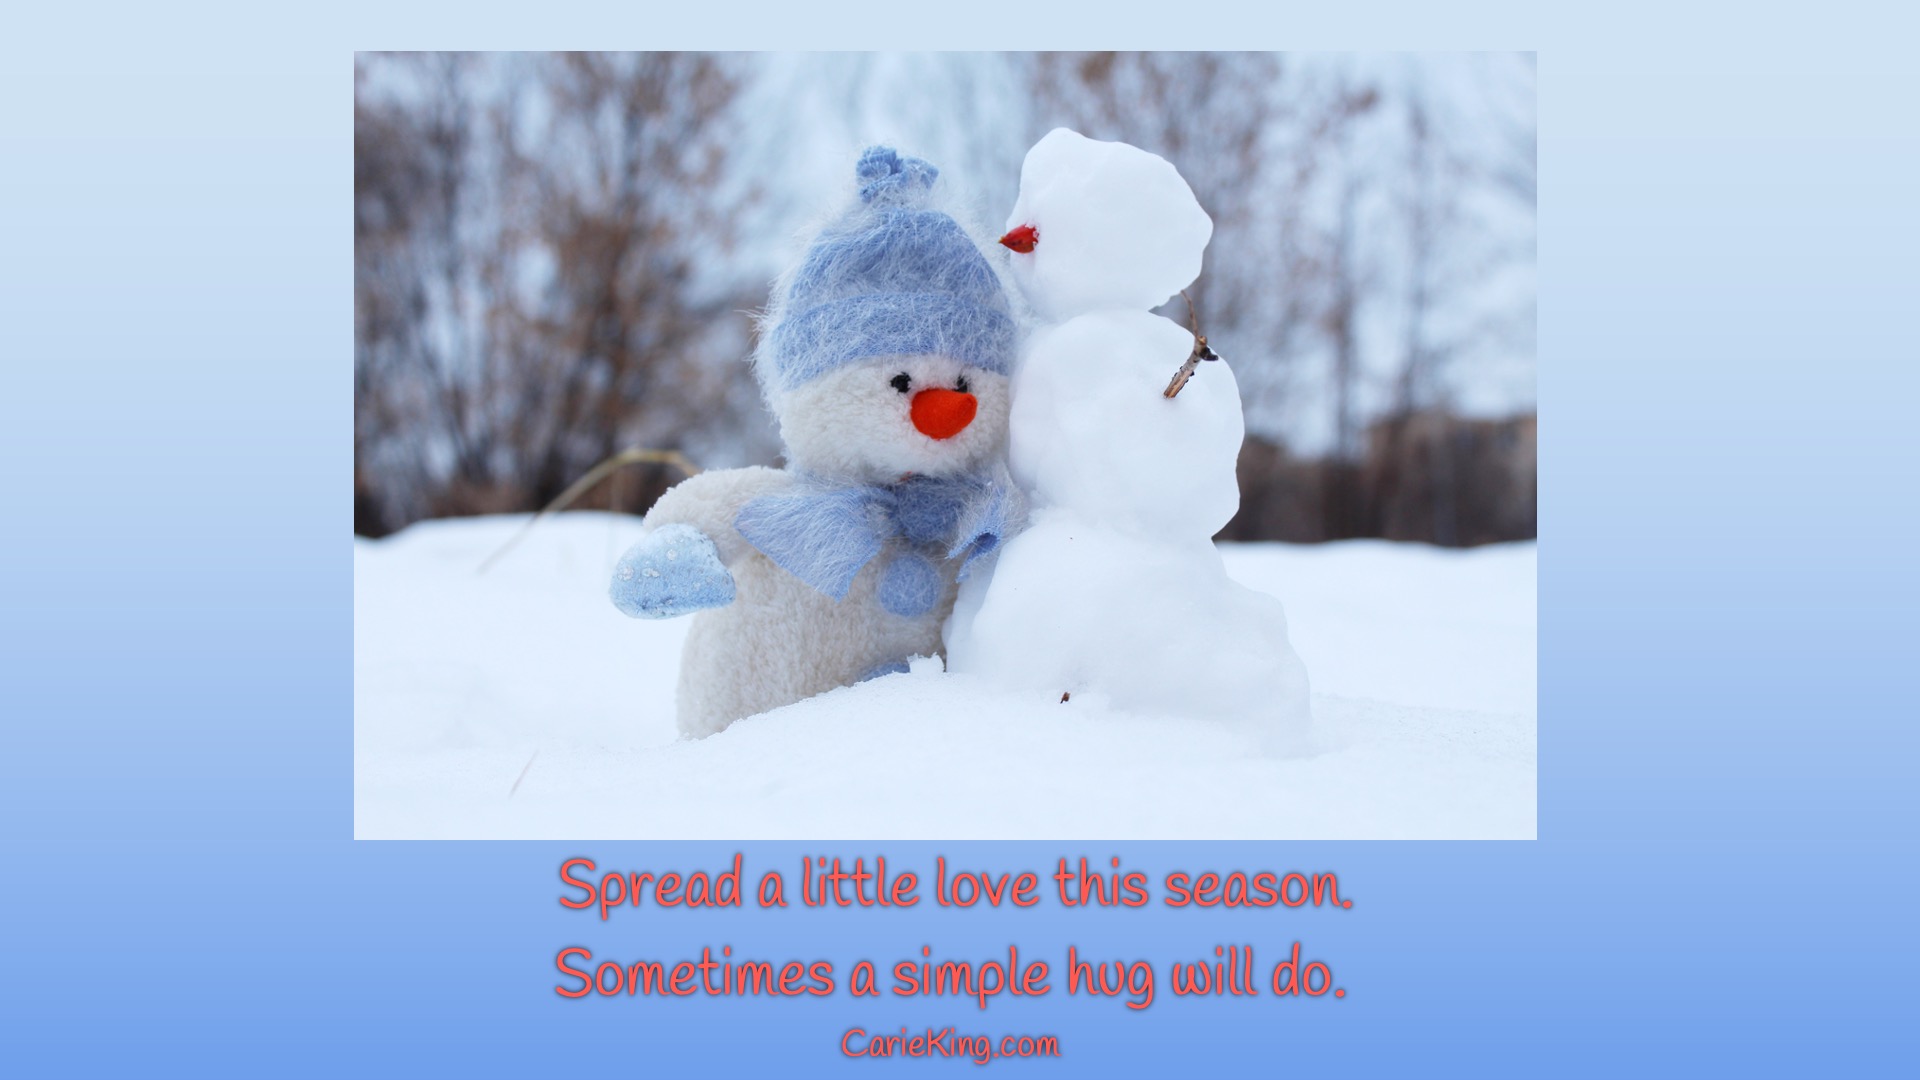 You are currently viewing Spread a little love this season!